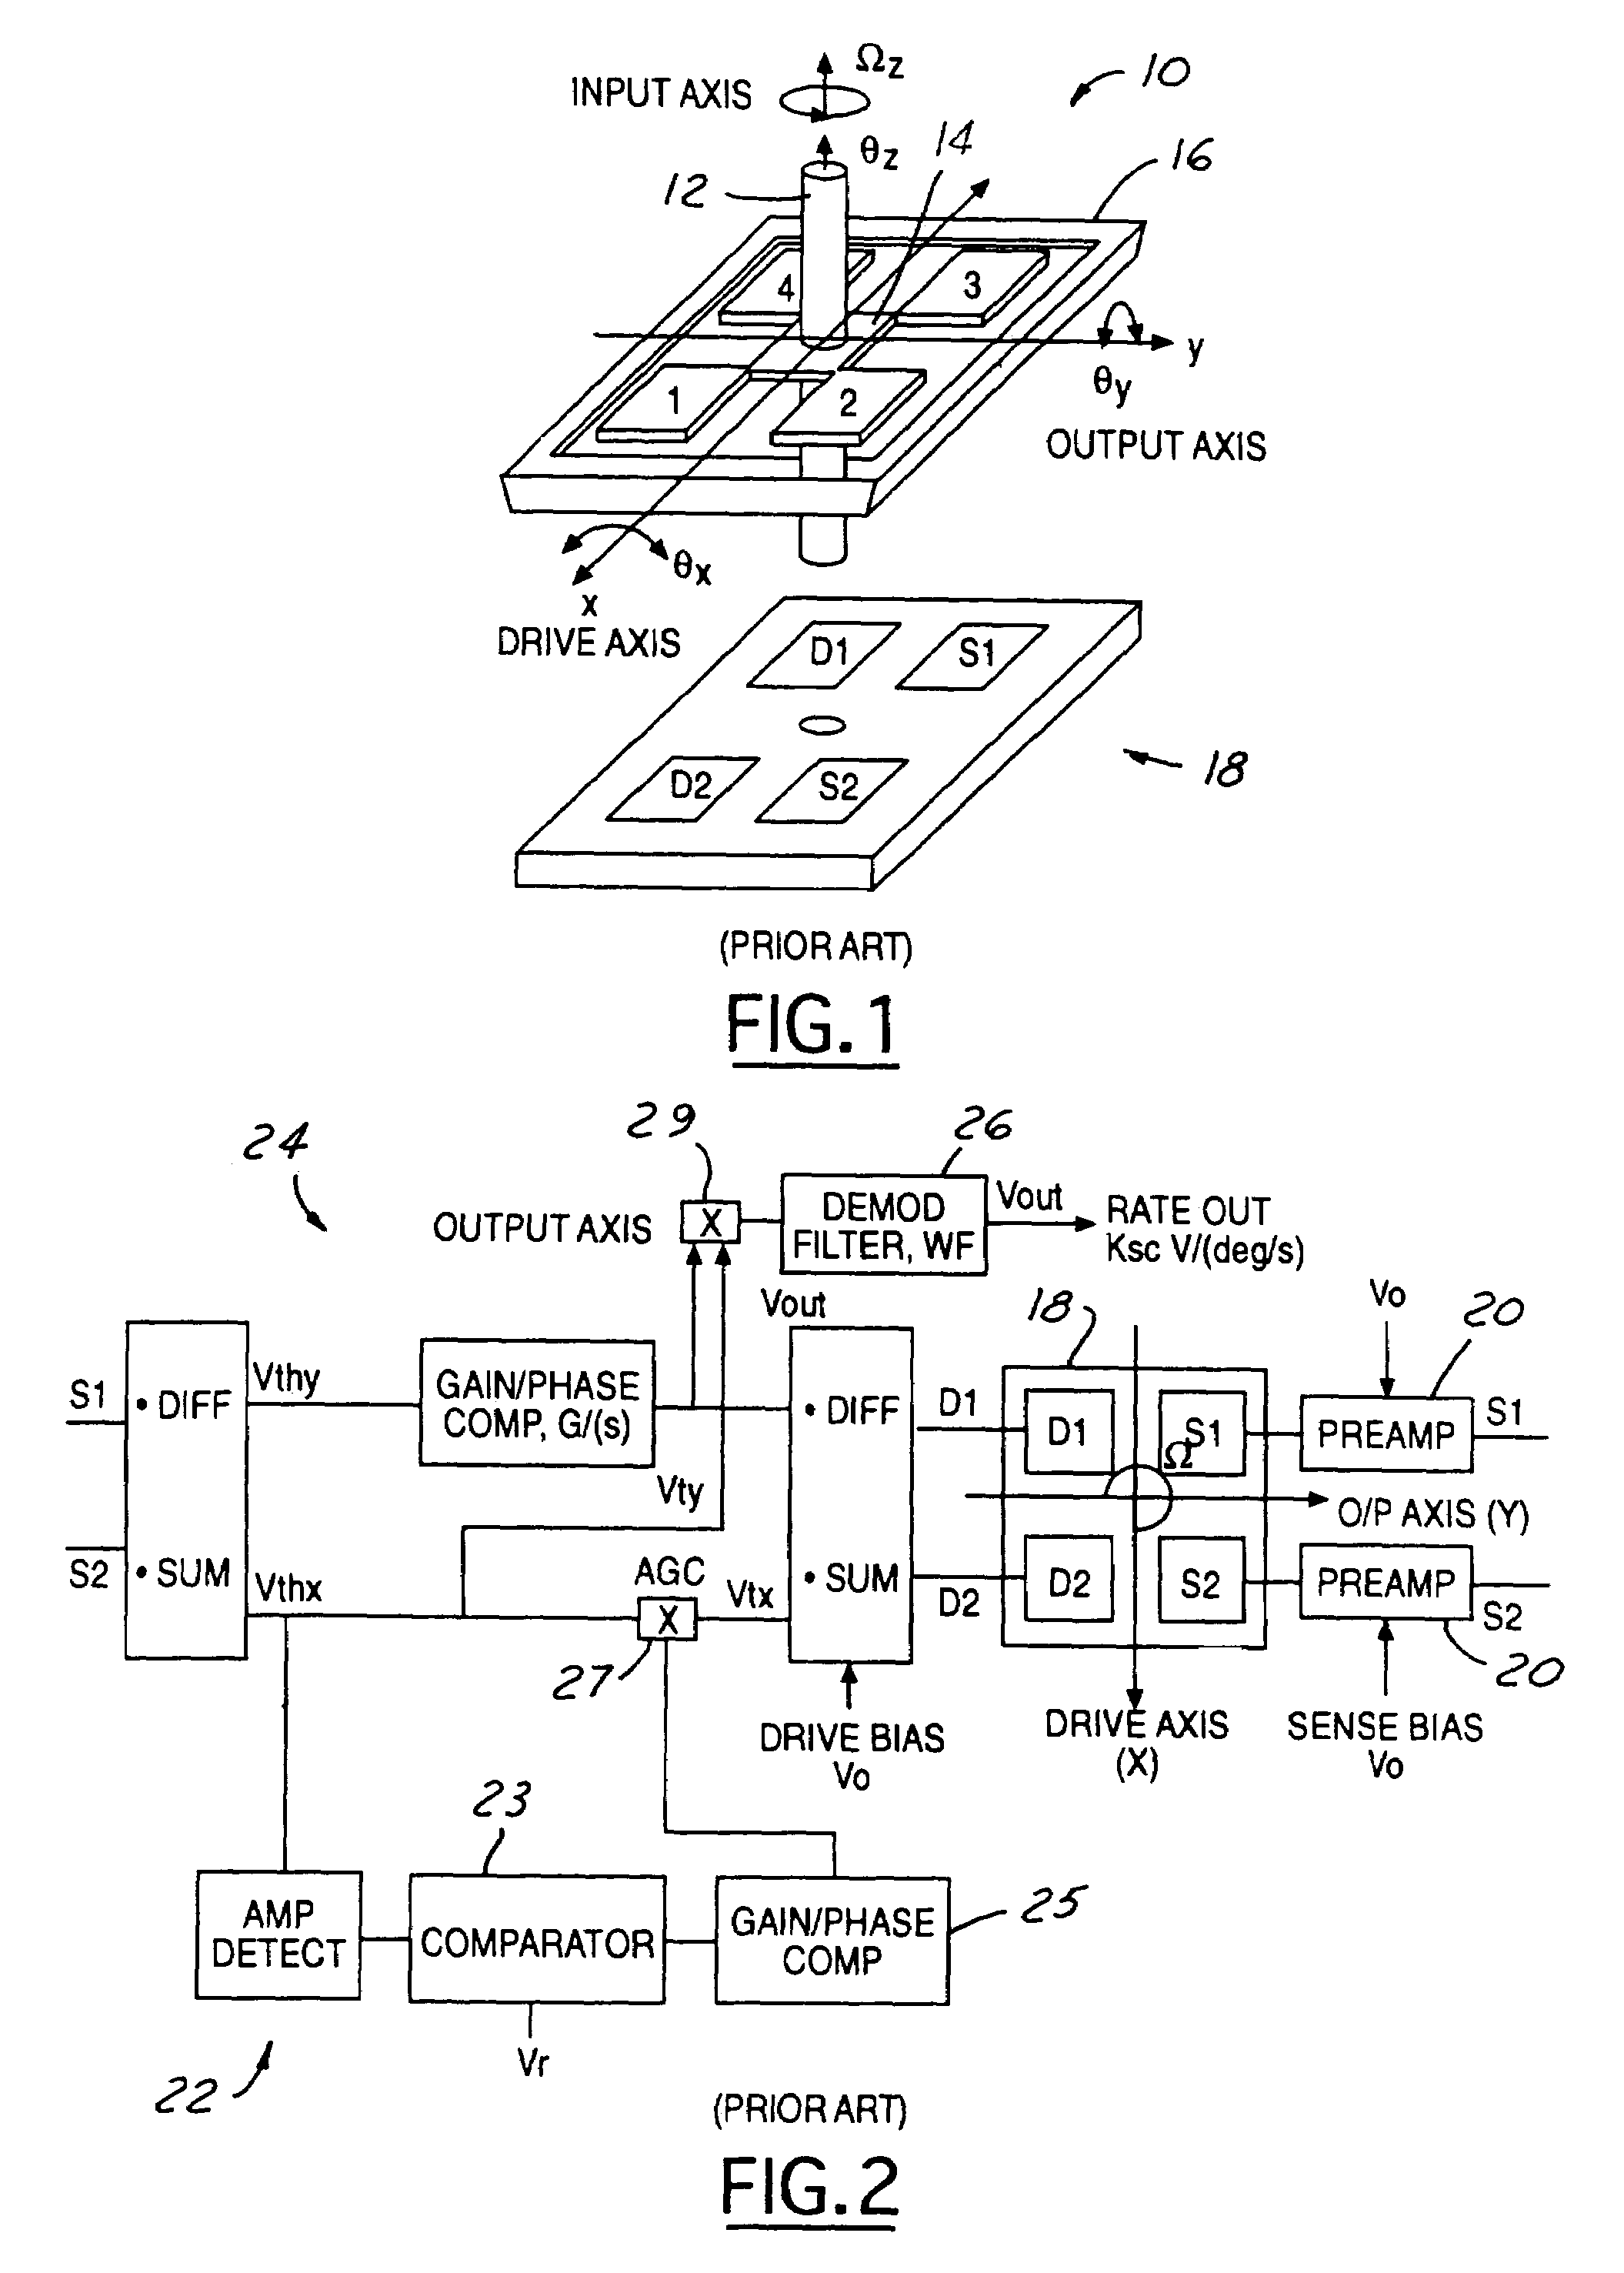 Cloverleaf microgyroscope with electrostatic alignment and tuning